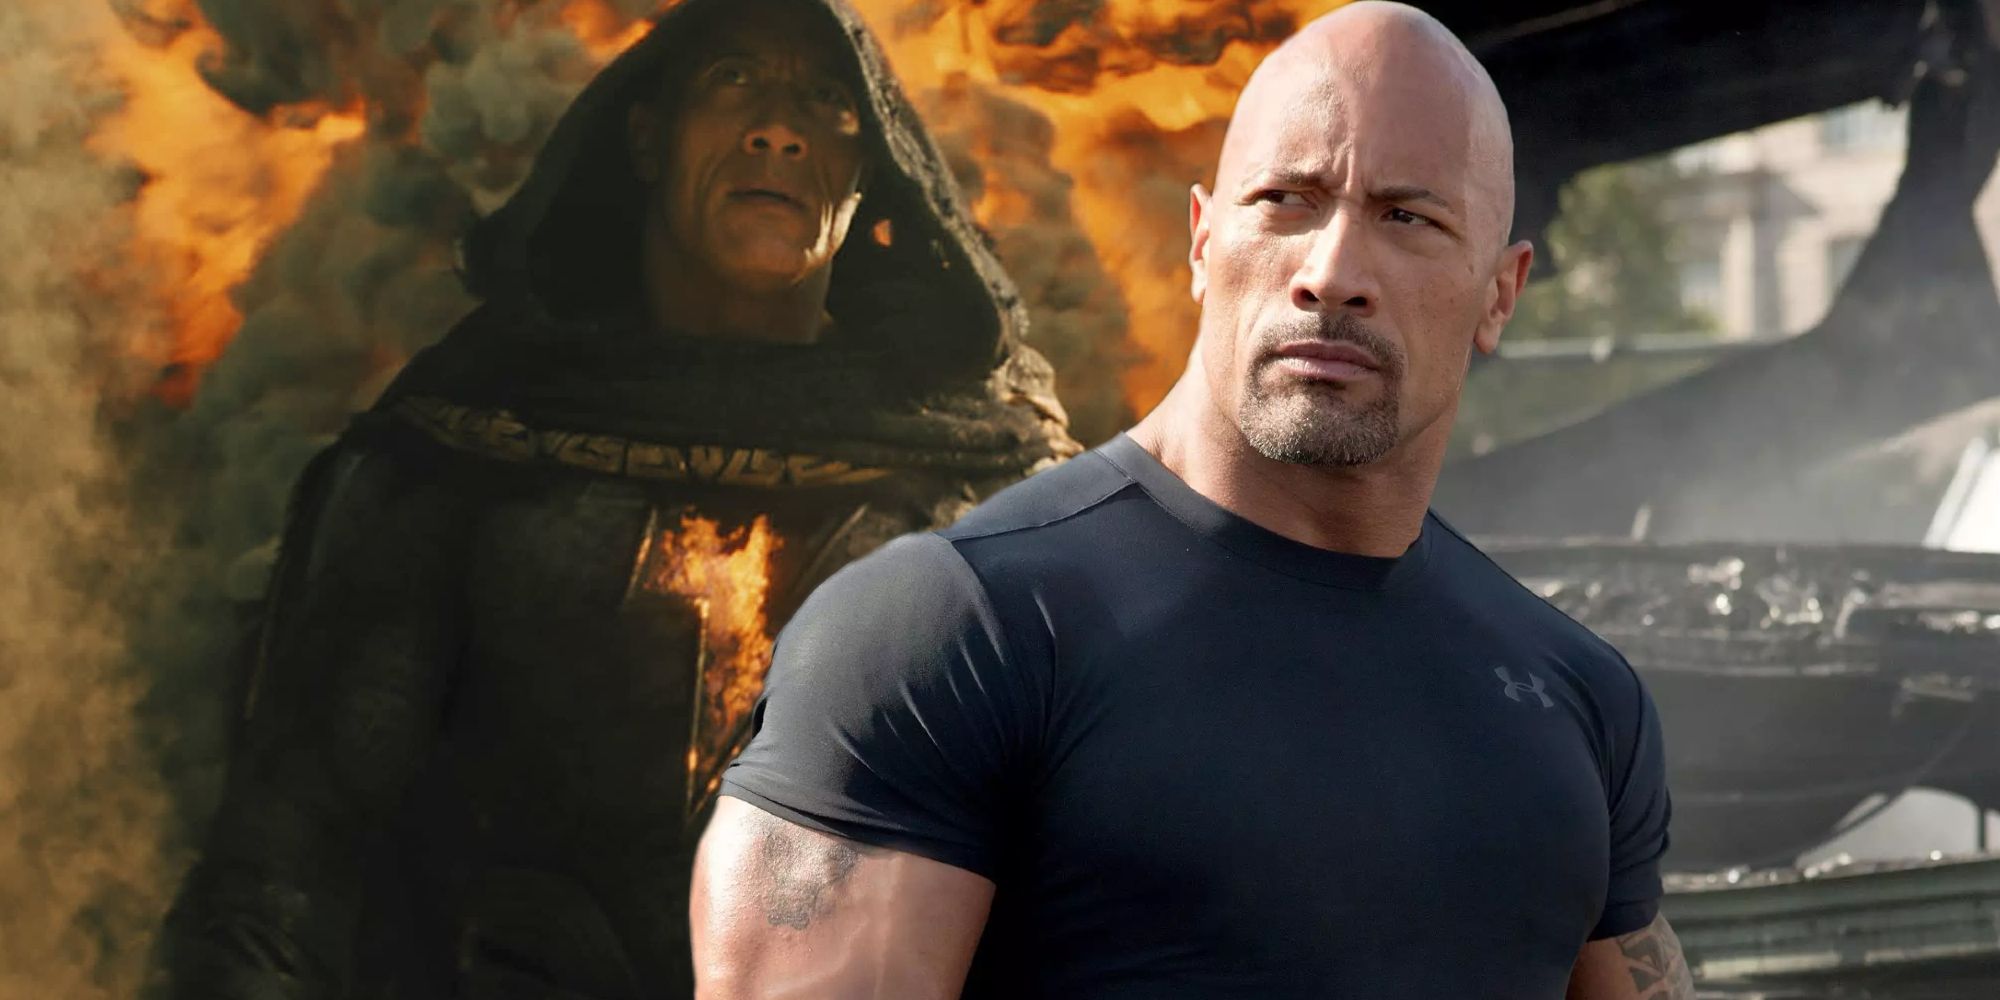 Black Adam Box Office Collection Day 1: Dwayne Johnson's film won't match  earnings of Marvel movies